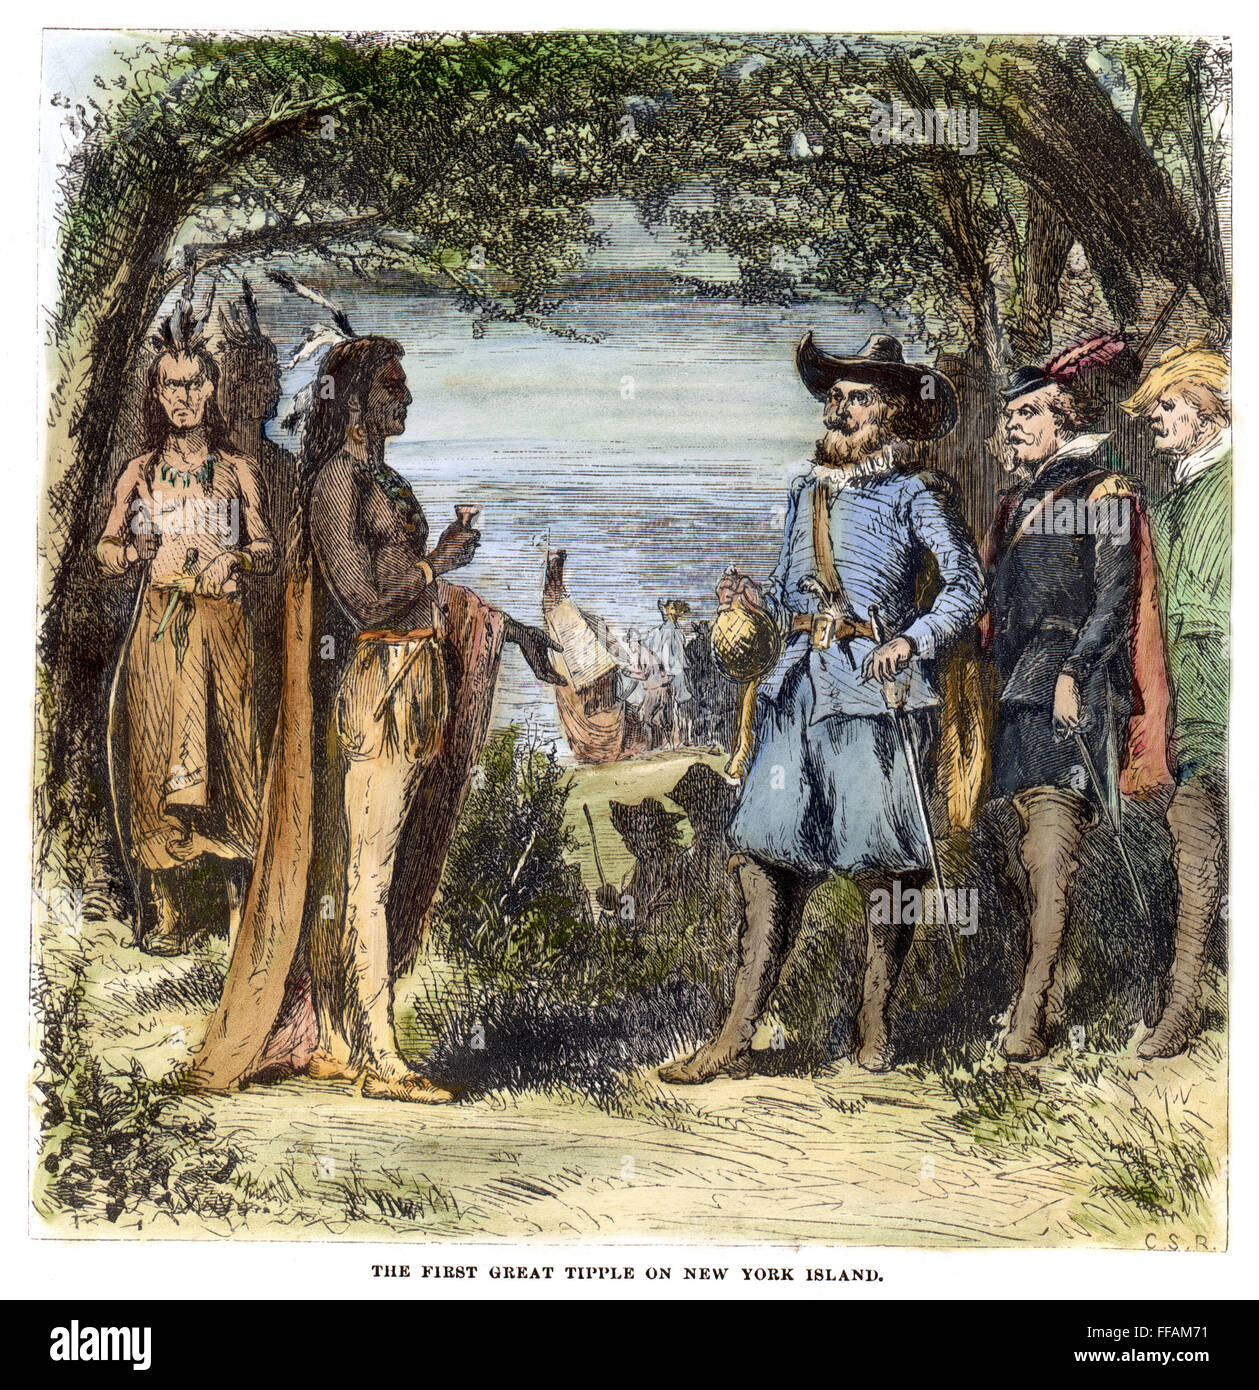 HUDSON & NATIVE AMERICANS, 1609. /nHenry Hudson (d.1611) shares brandy with natives of Manhattan Island at the beginning of his journey up the river which bears his name, September 1609. Wood engraving, American, 1876. Stock Photo